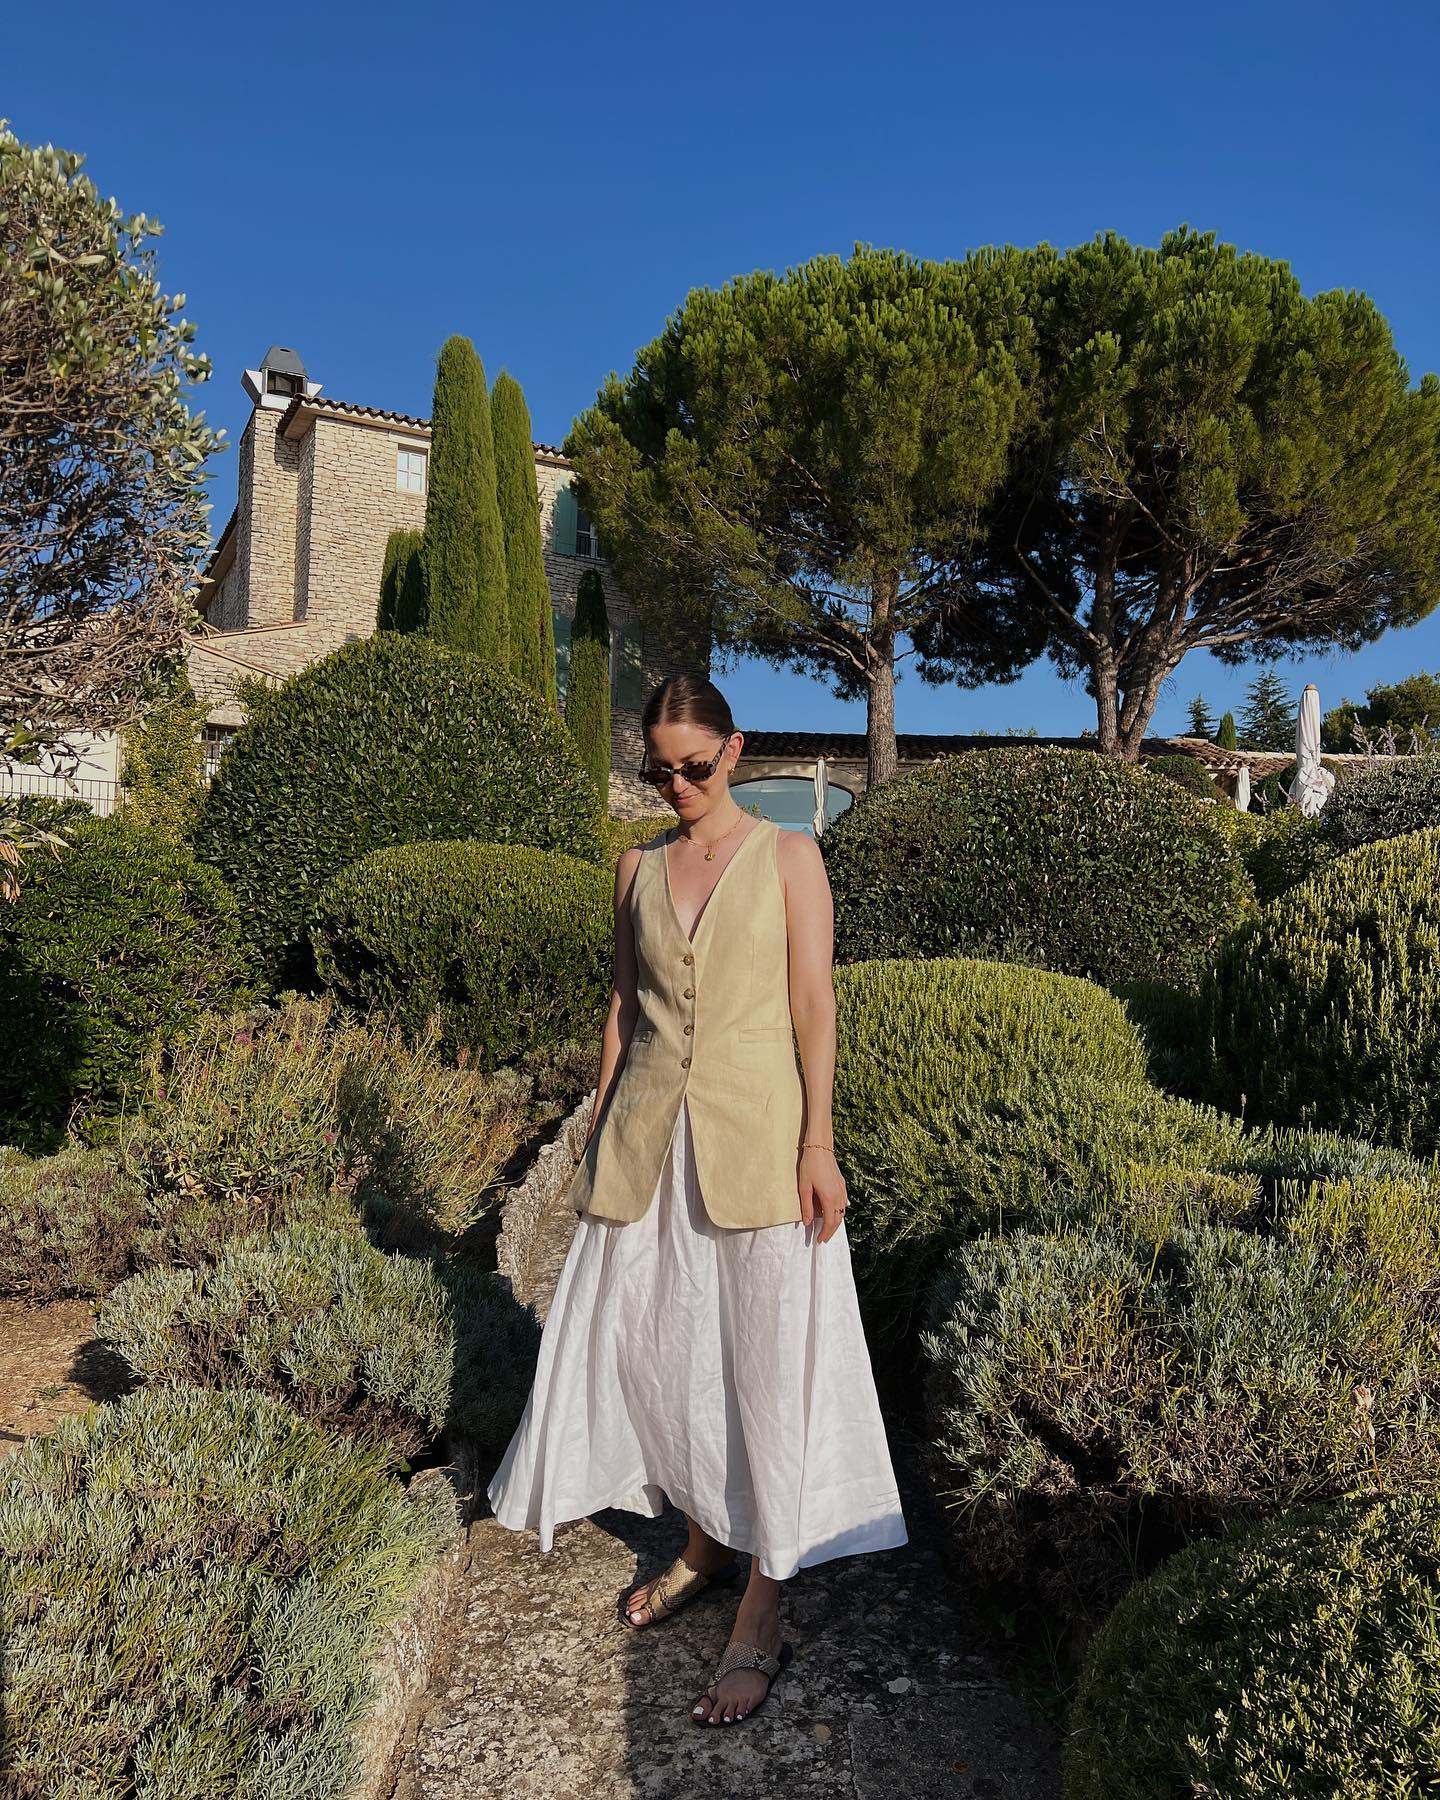 French girl linen outfits: @ruerodier